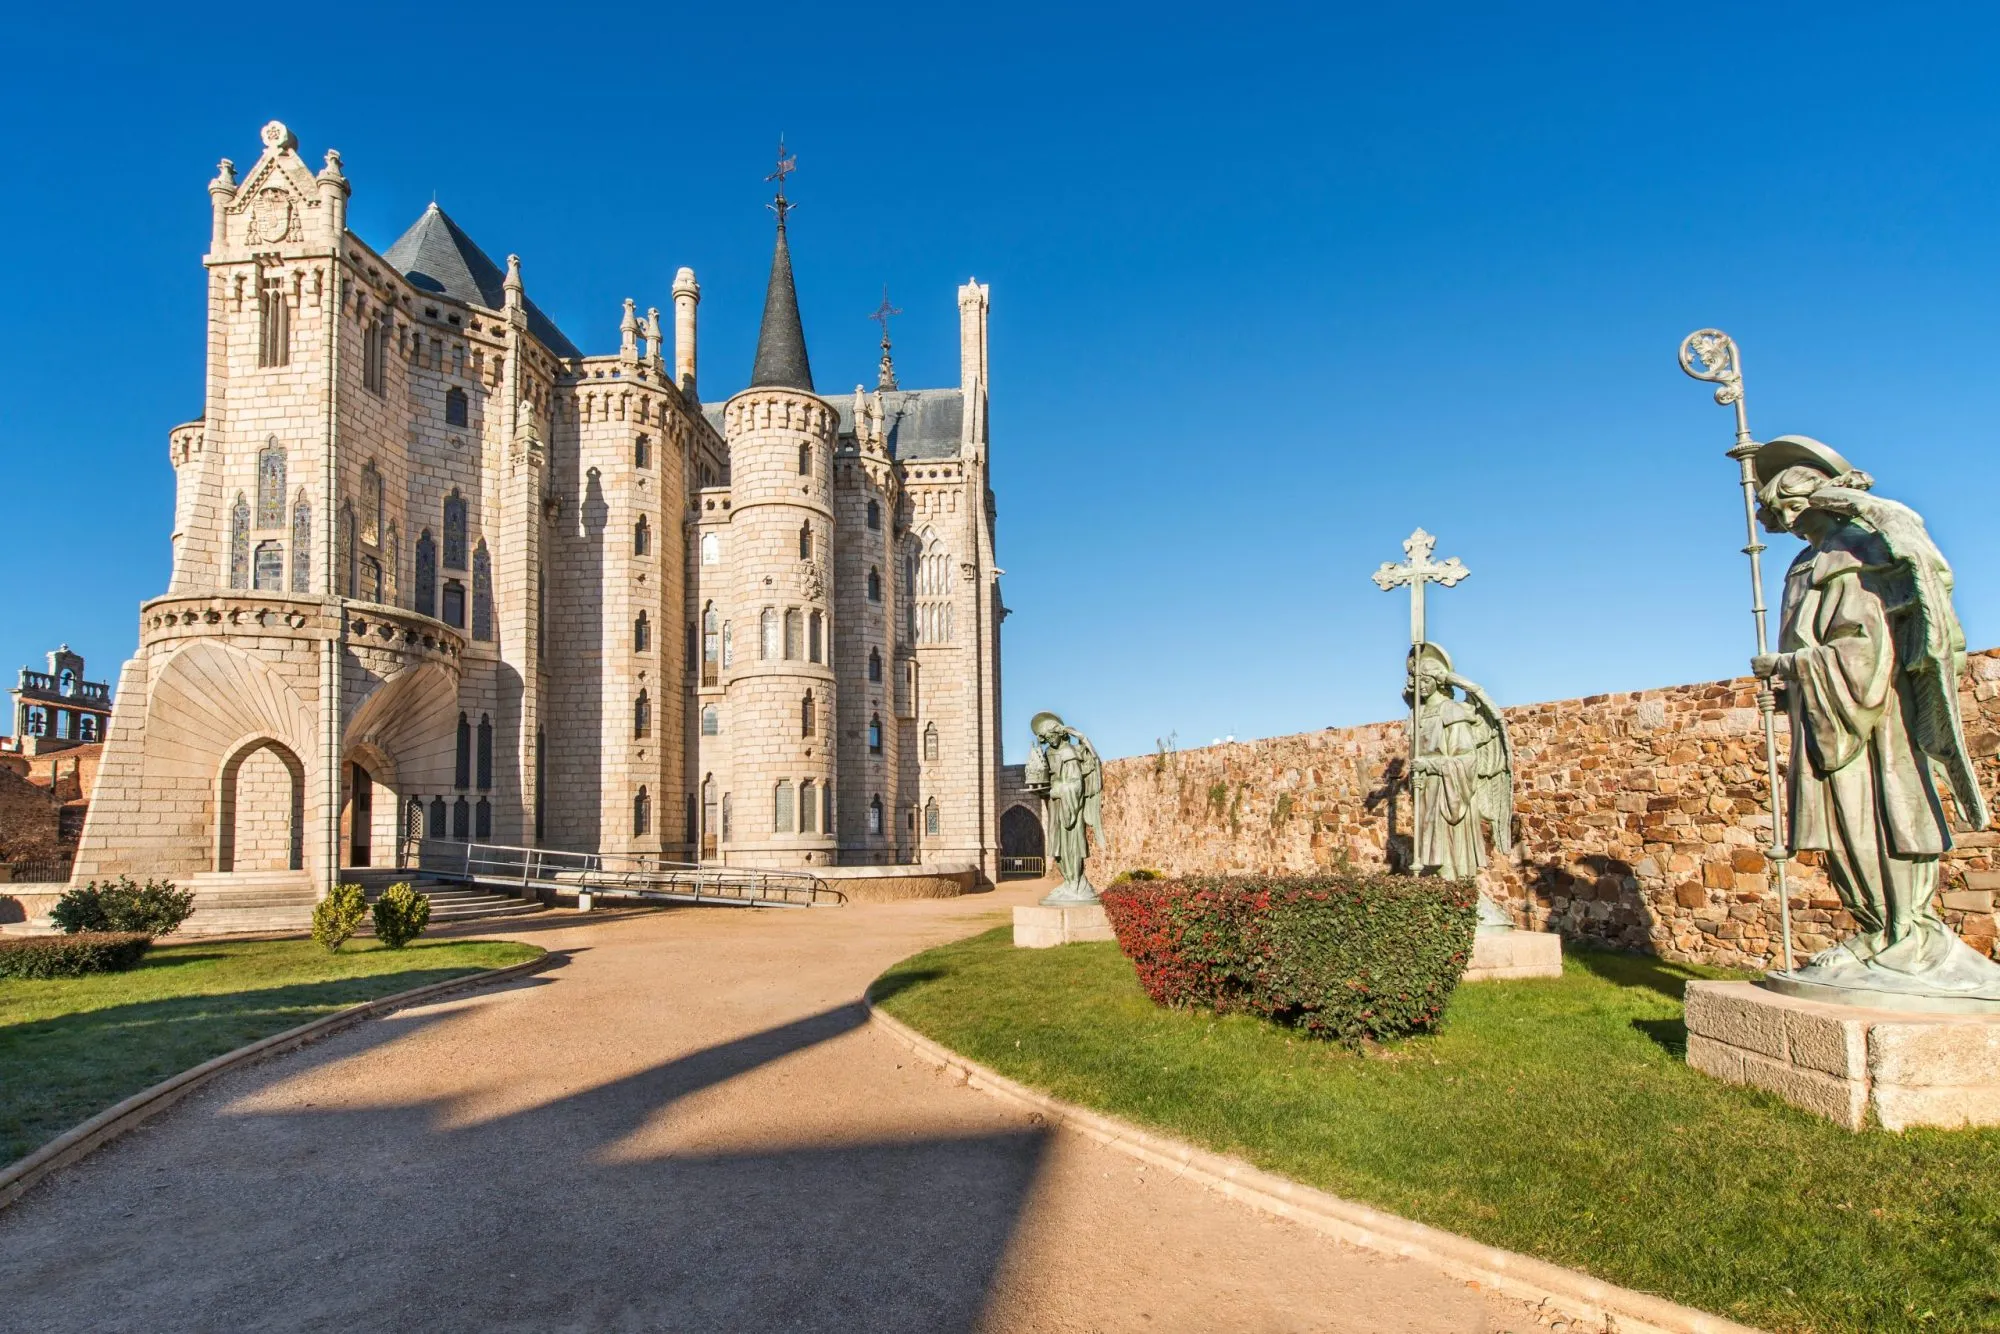 Views of Episcopal palace in Astorga, Leon, Spain.